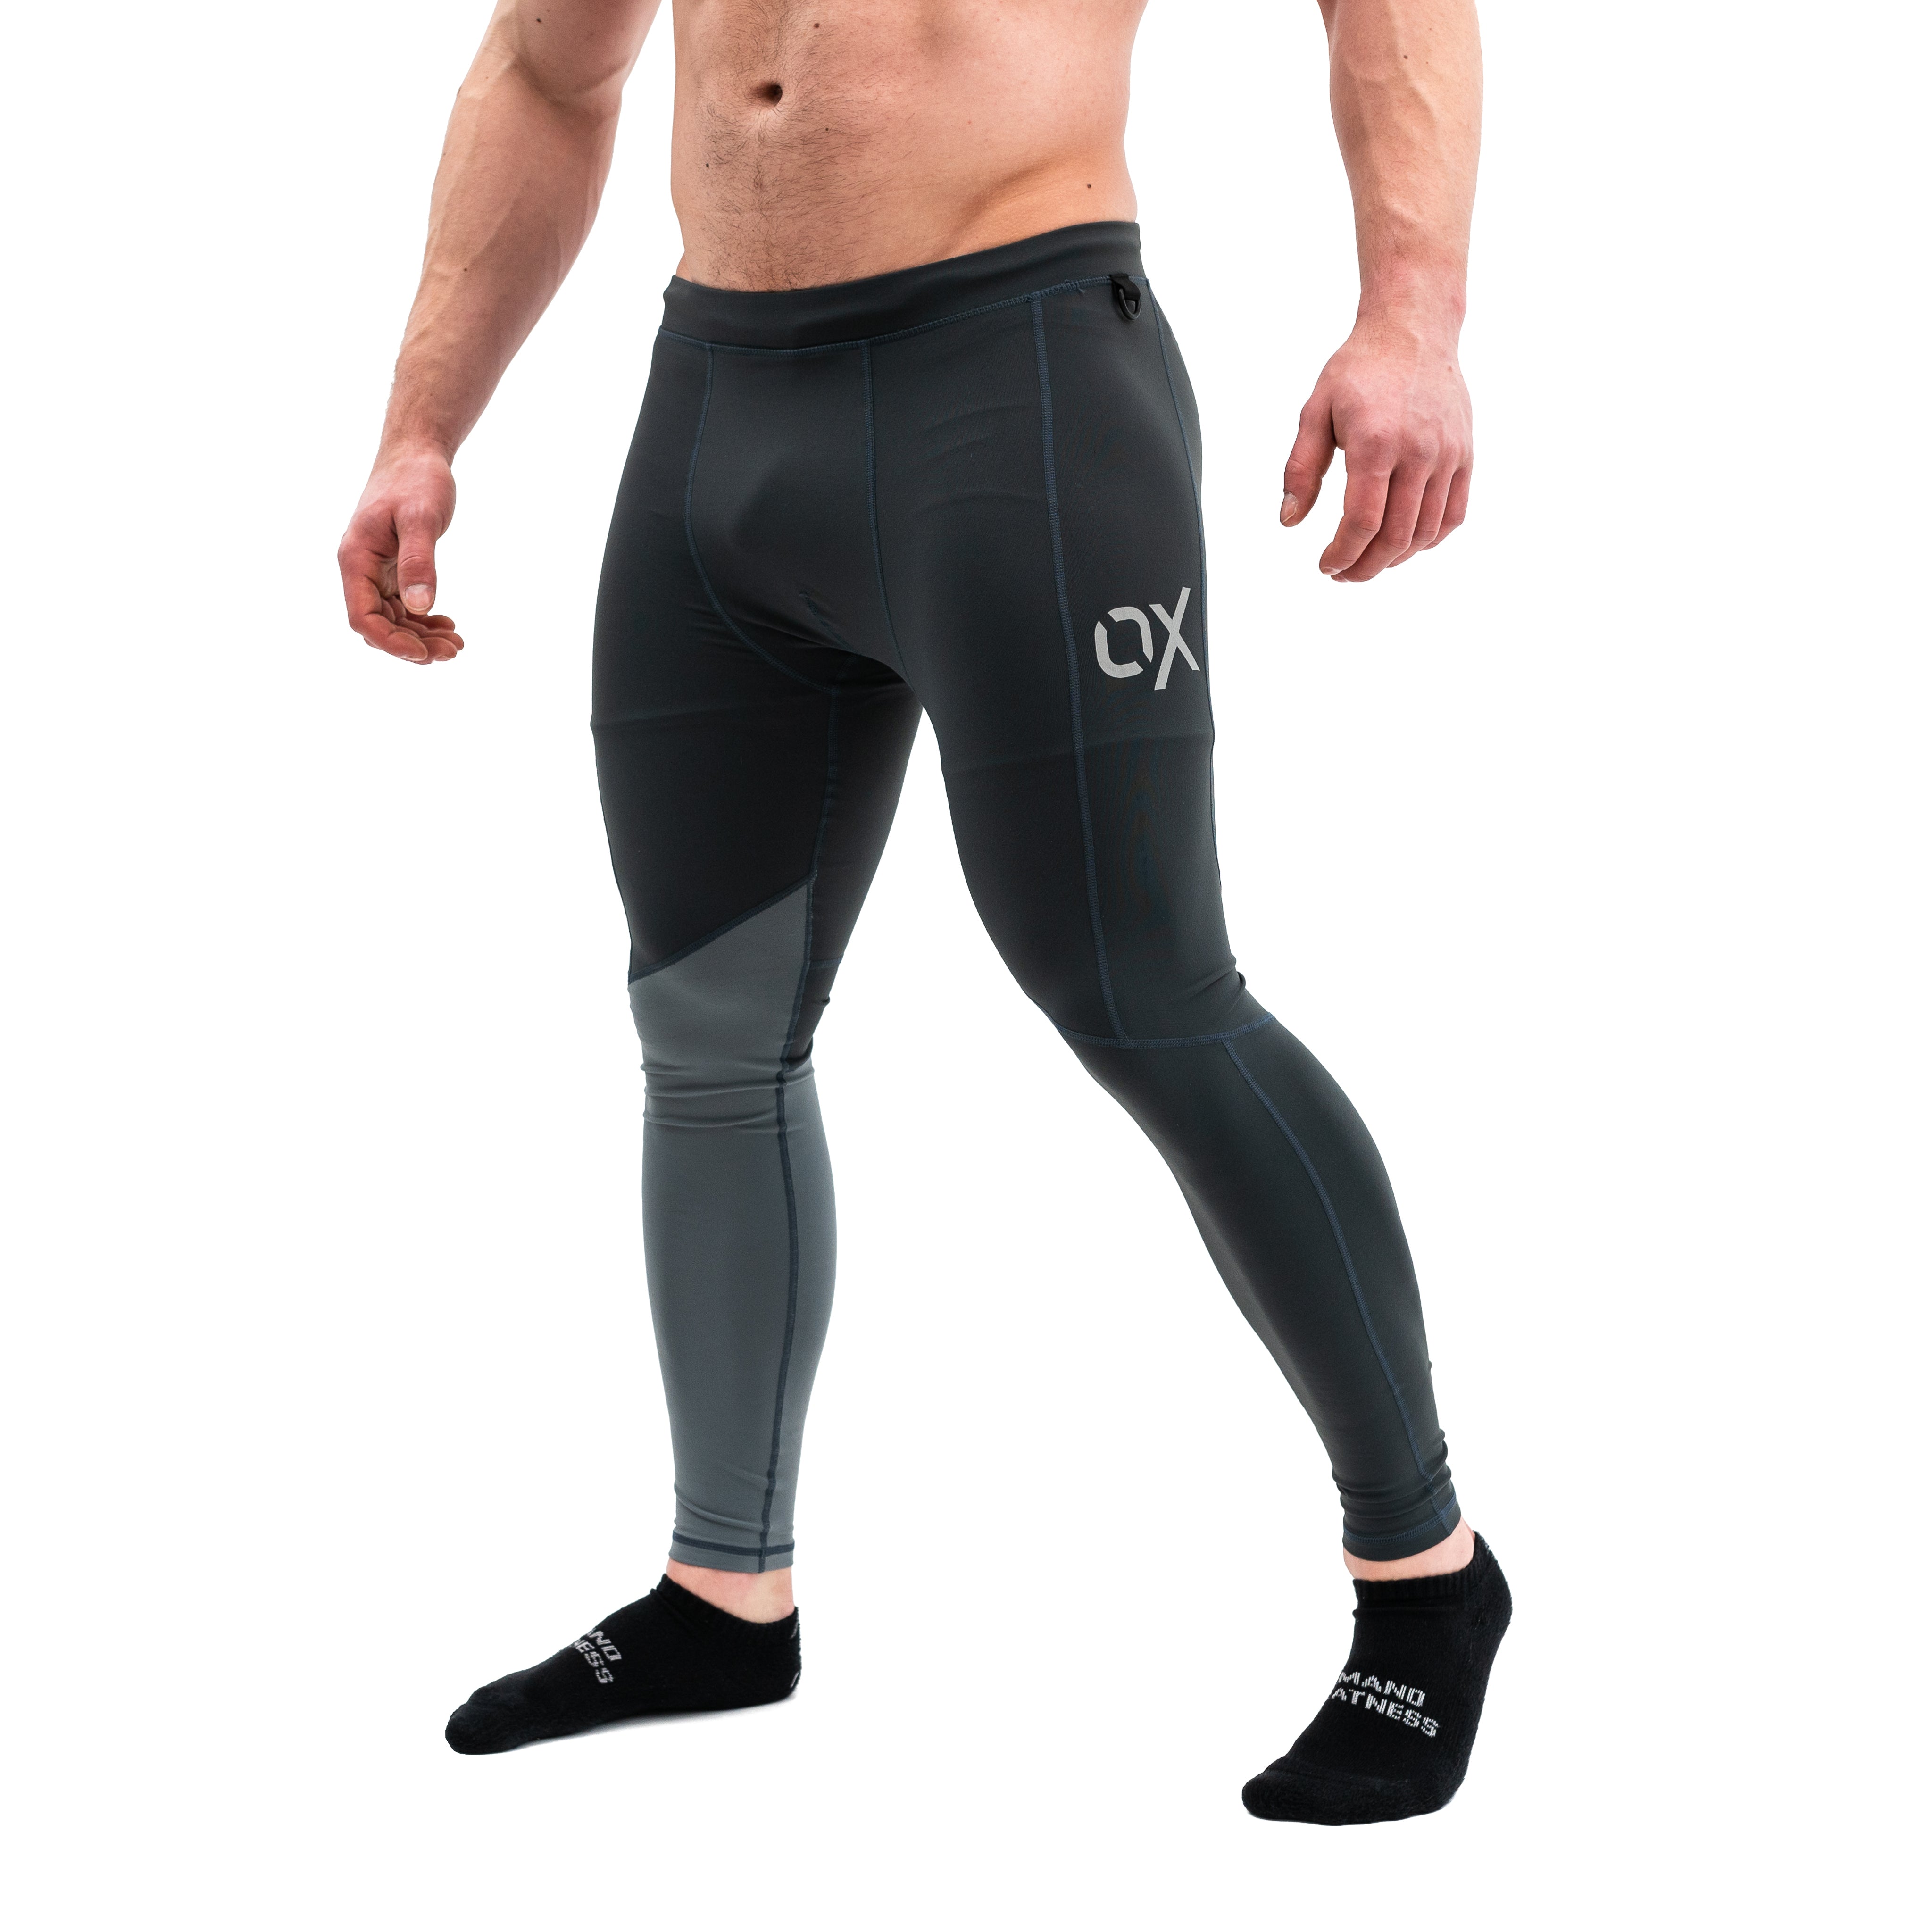 Chromium compression pants for the powerlifter and weightlifter. Our same compression pants in a new Chromium colourway to go with your new chromium bar grip shirts. Perfect powerlifting apparel providing maximum comfort. A7 has IPF approved powerlifting apparel and is perfect for Powerlifting, weightlifting, strongman and all your strength sport’s needs. Shipping to Europe (France, Germany, Spain, Italy and the Netherlands) and the UK, Norway, Switzerland, and Iceland.